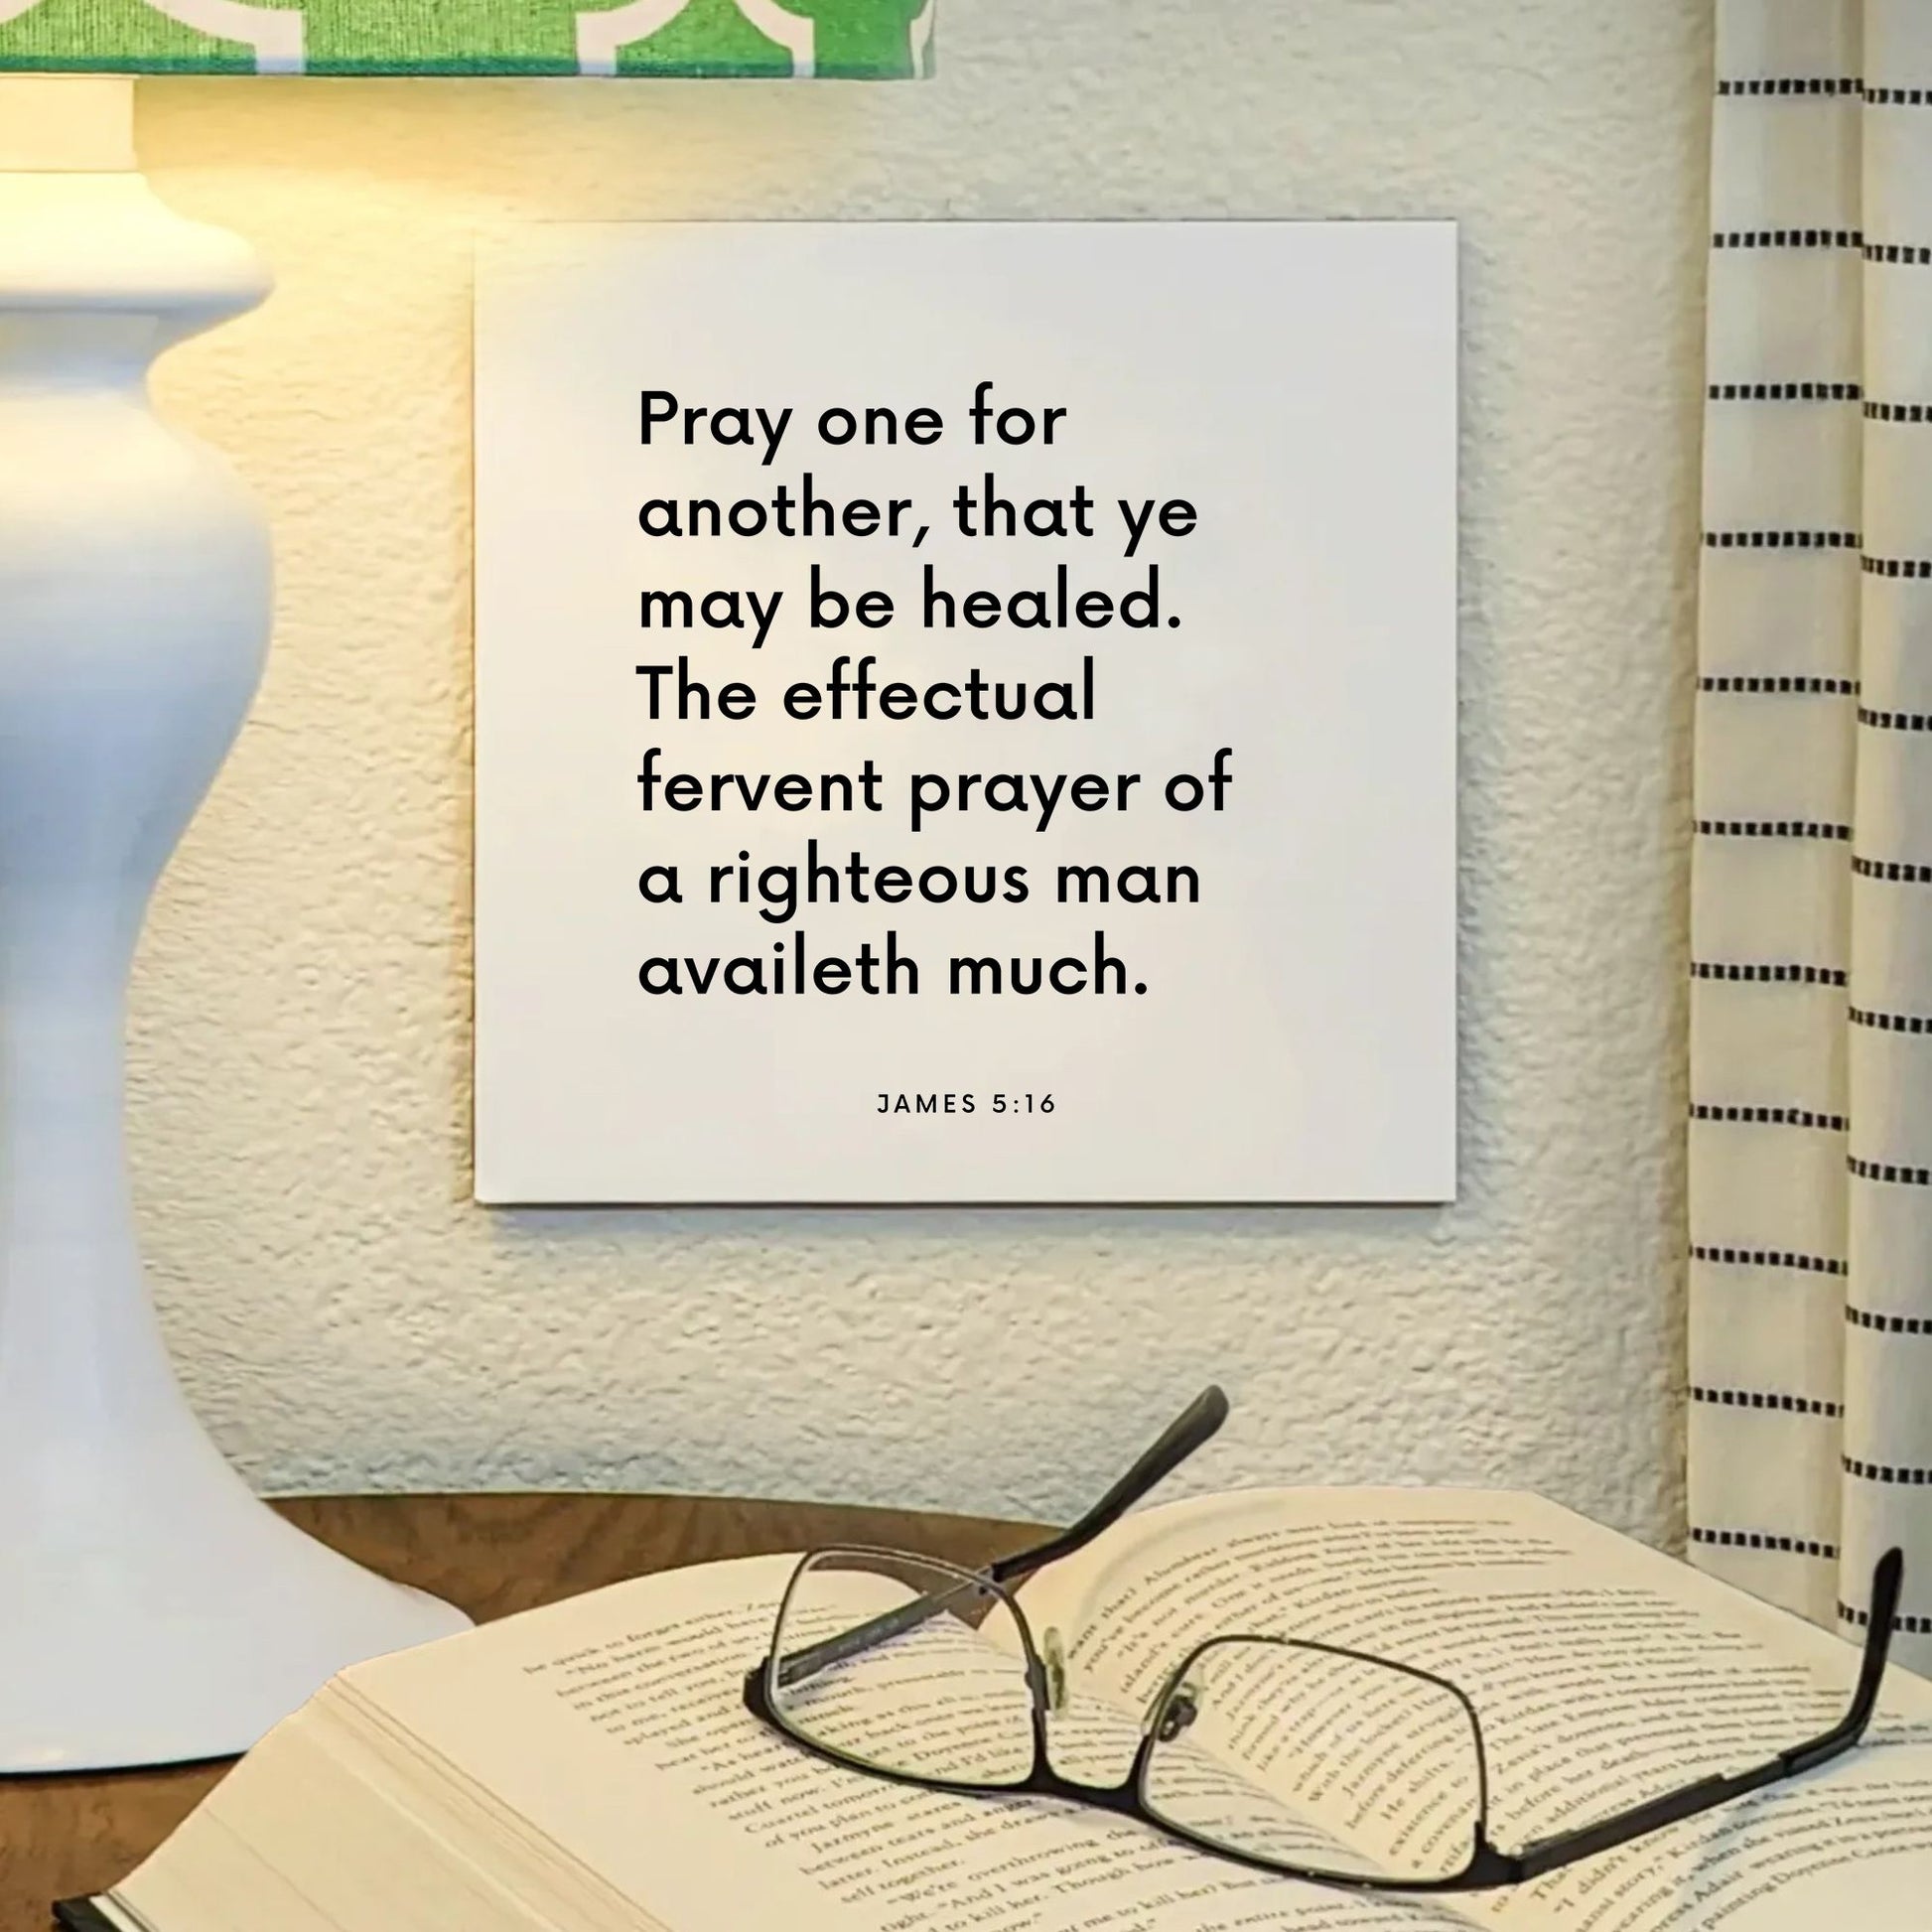 Lamp mouting of the scripture tile for James 5:16 - "Pray one for another, that ye may be healed"